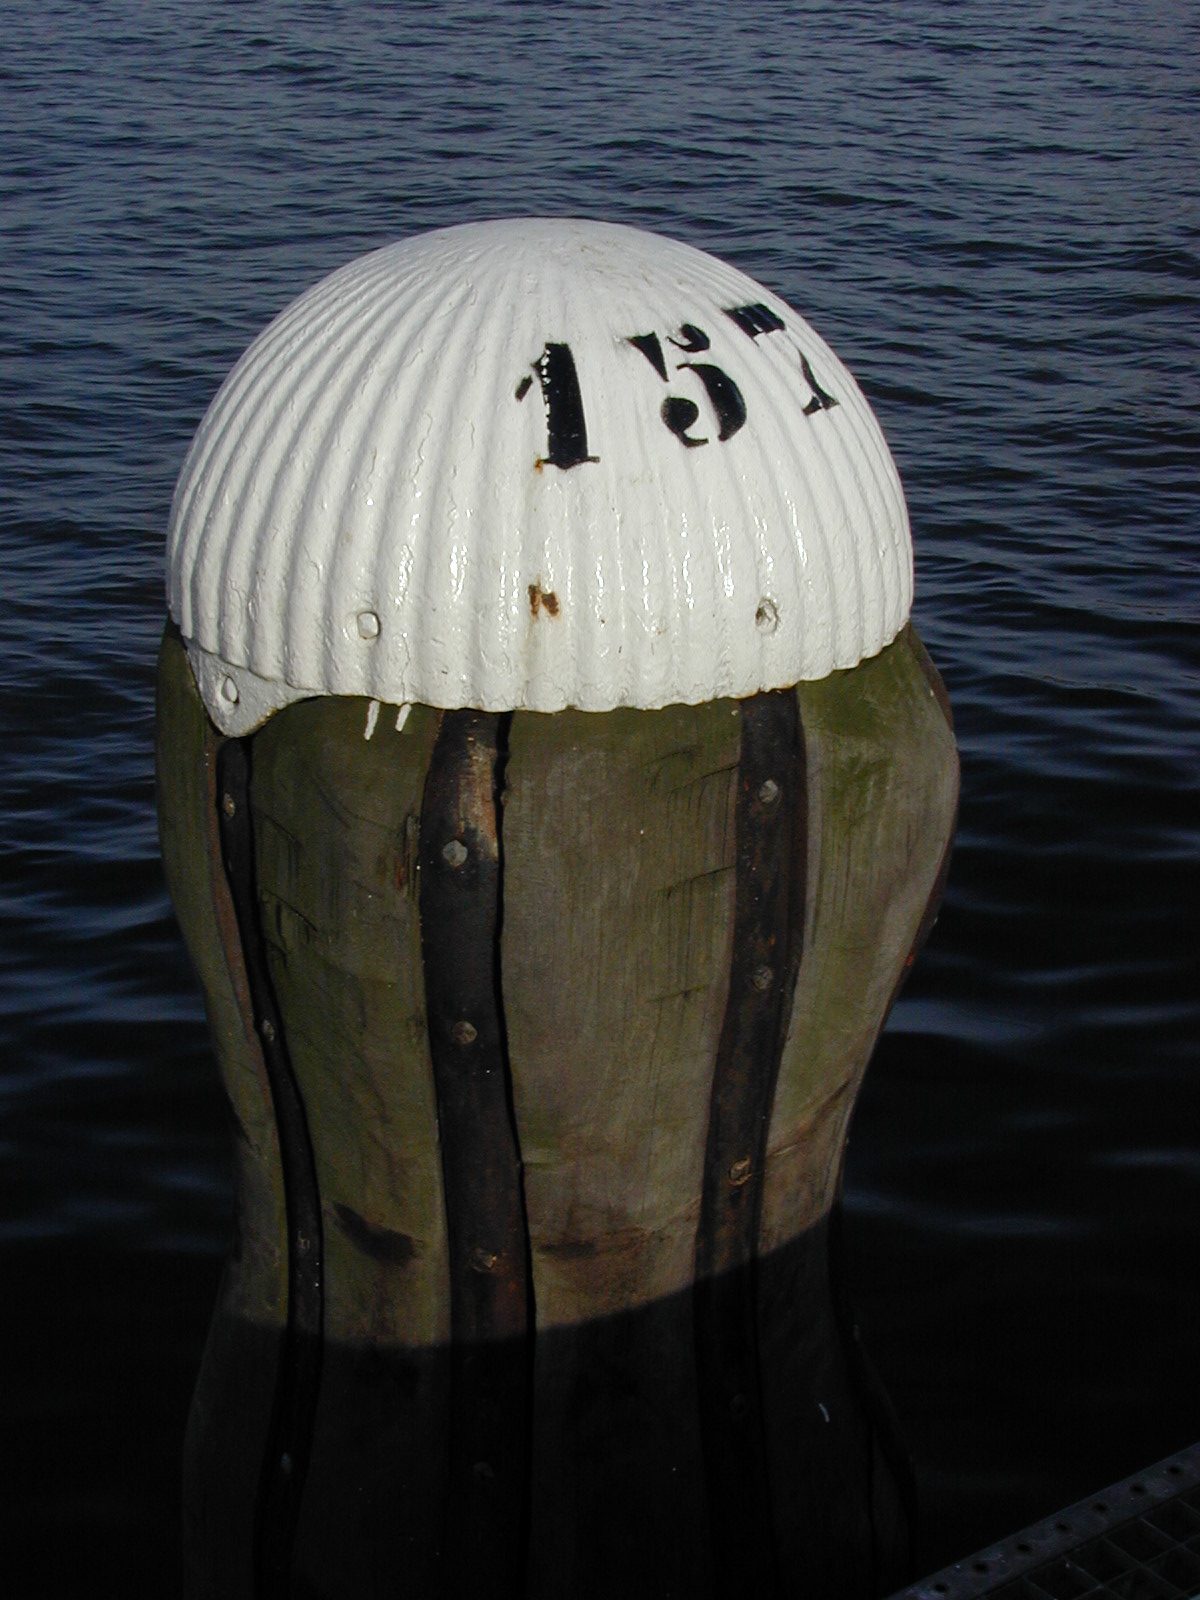 water pole wharf quay architecture exteriors objects typo typography numbers antique water wavepattern wave